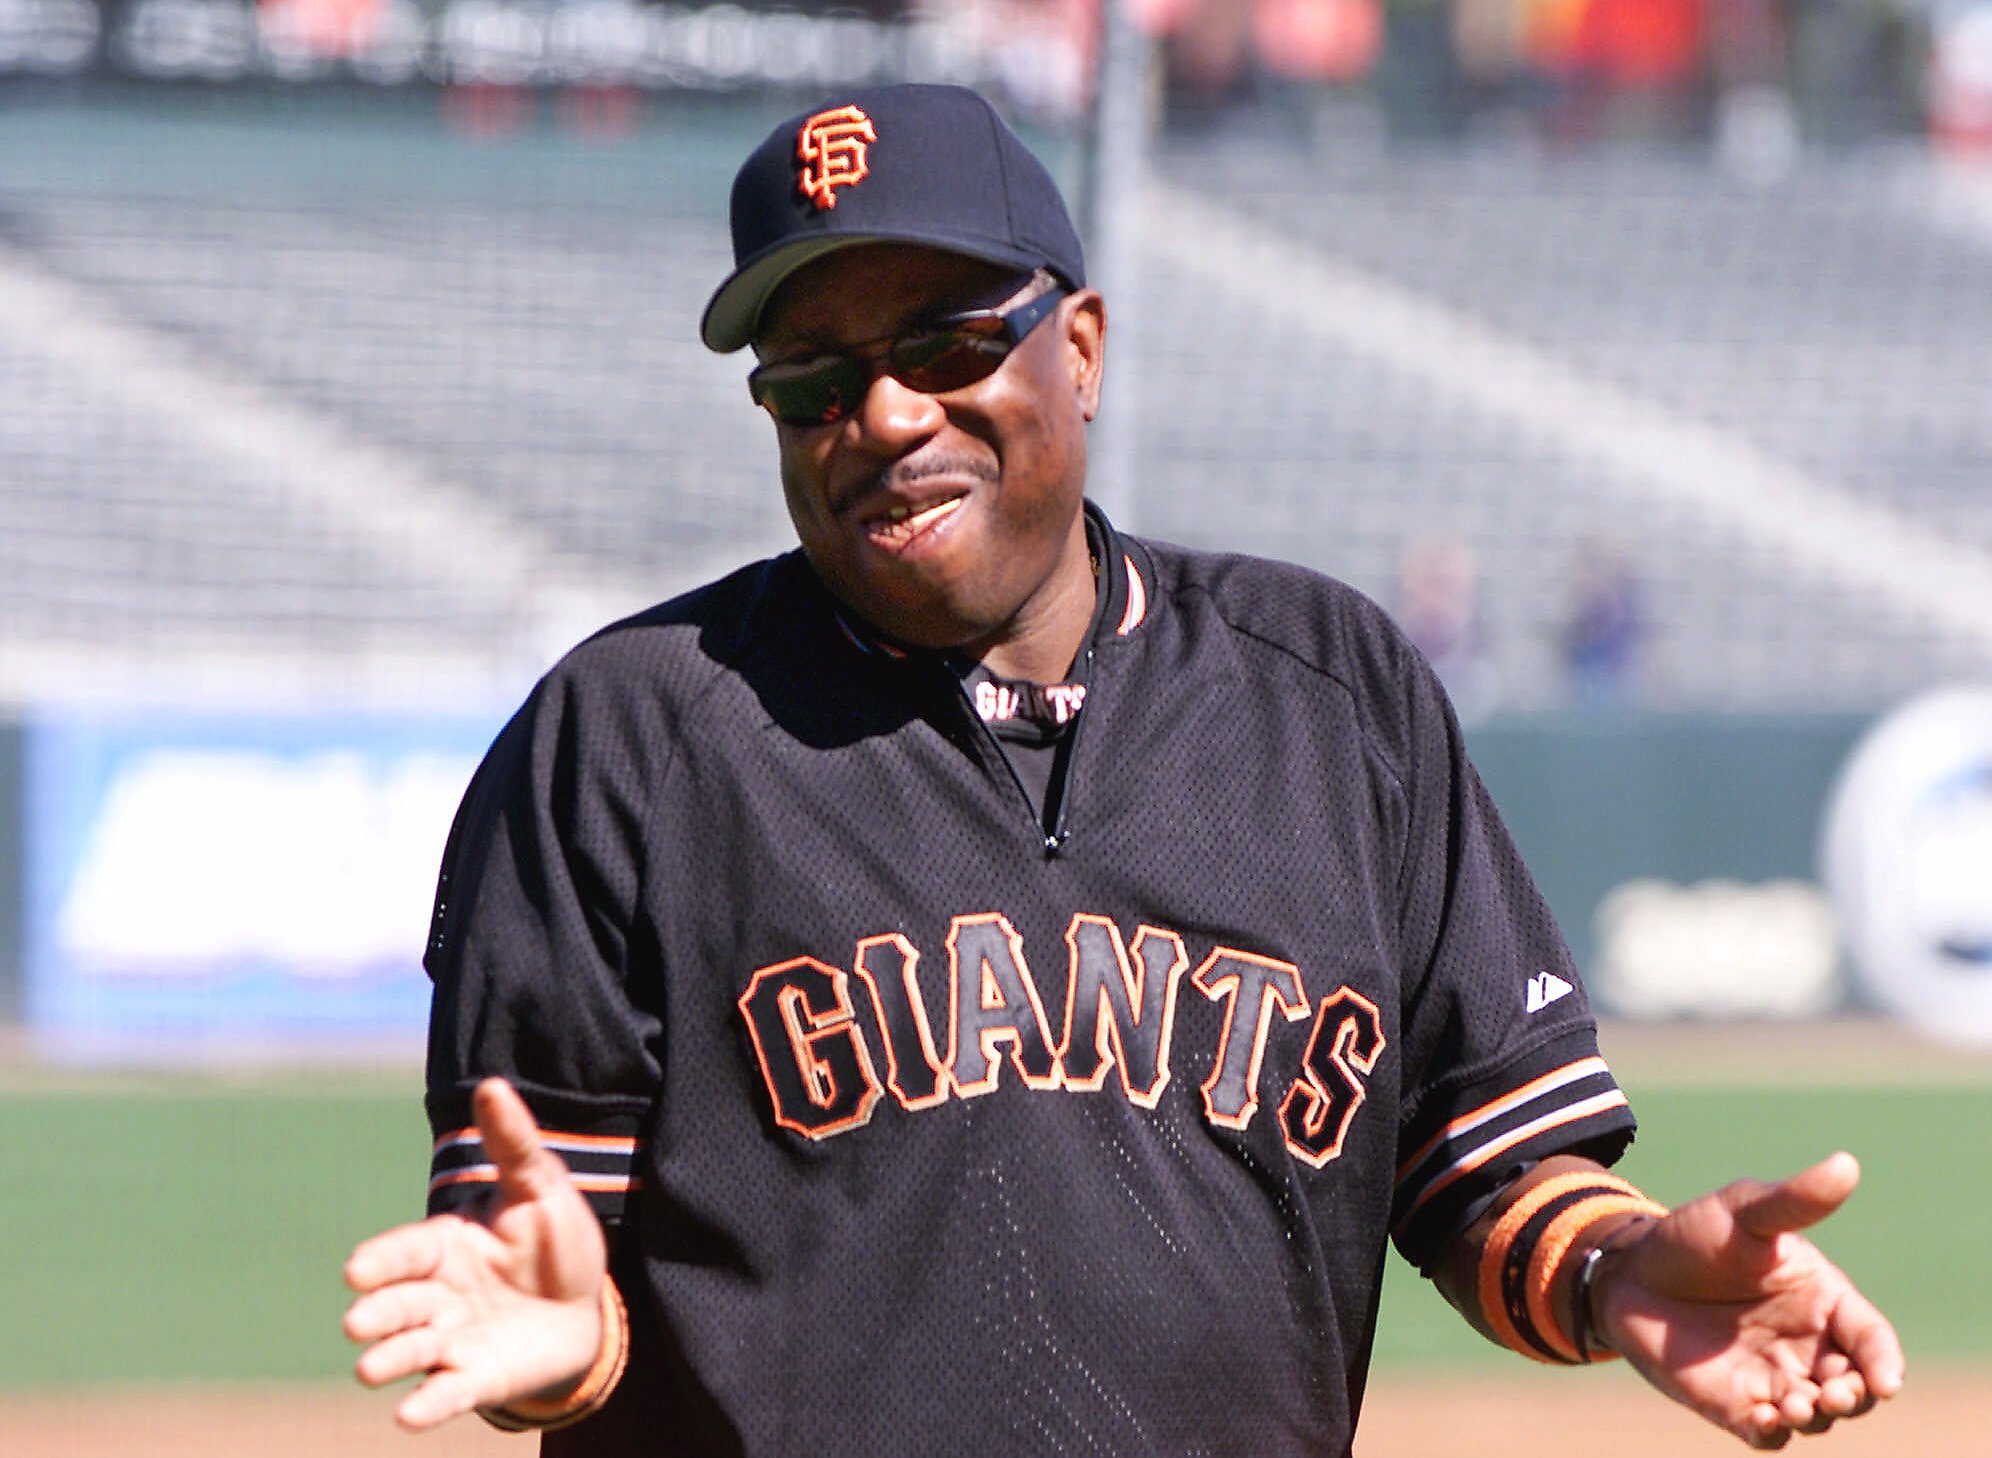 Giants bringing back Dusty Baker as special adviser - SFChronicle.com